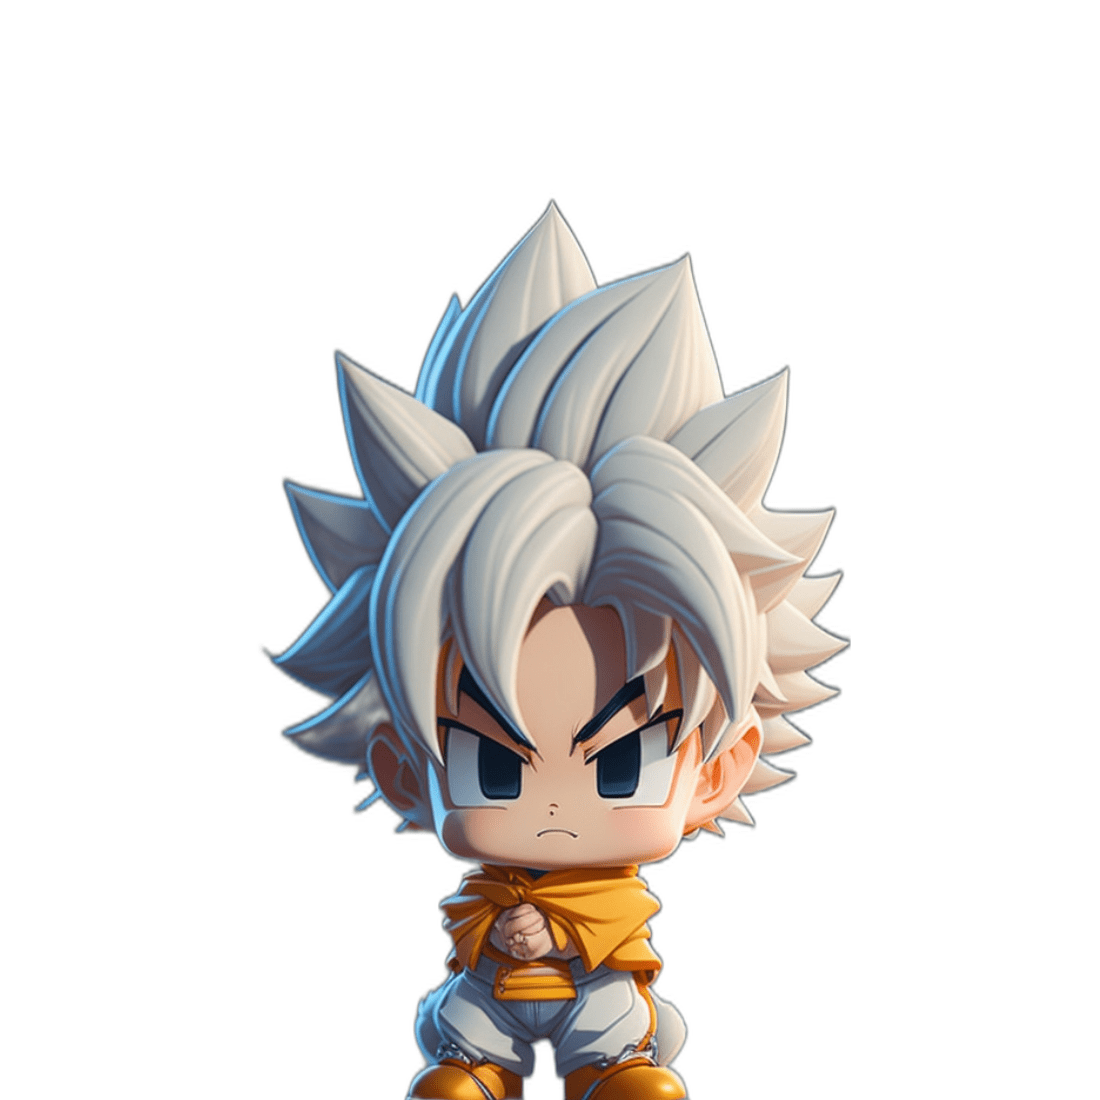 3D Animated style Goku design high quality cover image.